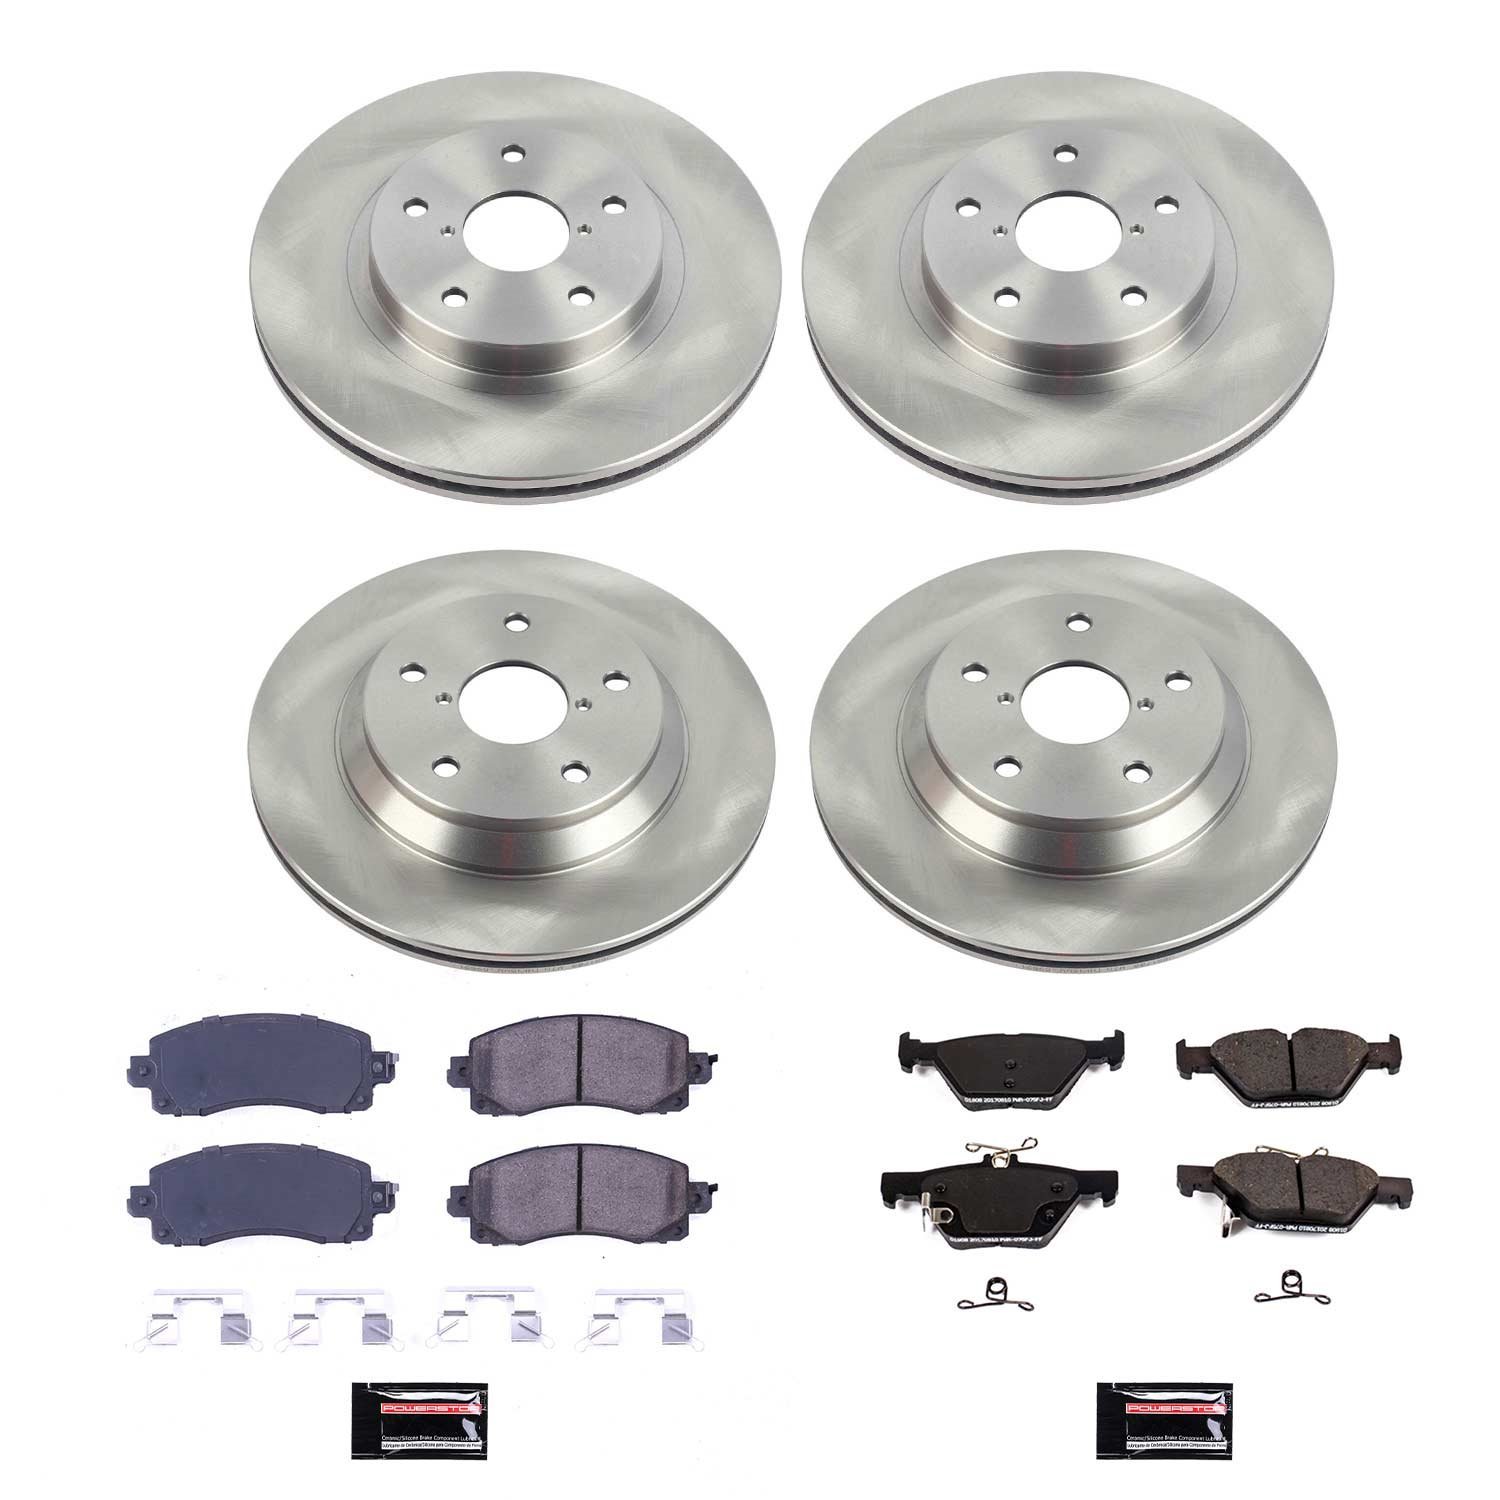 Z17 Stock Replacement Front and Rear Brake Pads and Rotors Kit 2019-2021 Subaru Forester